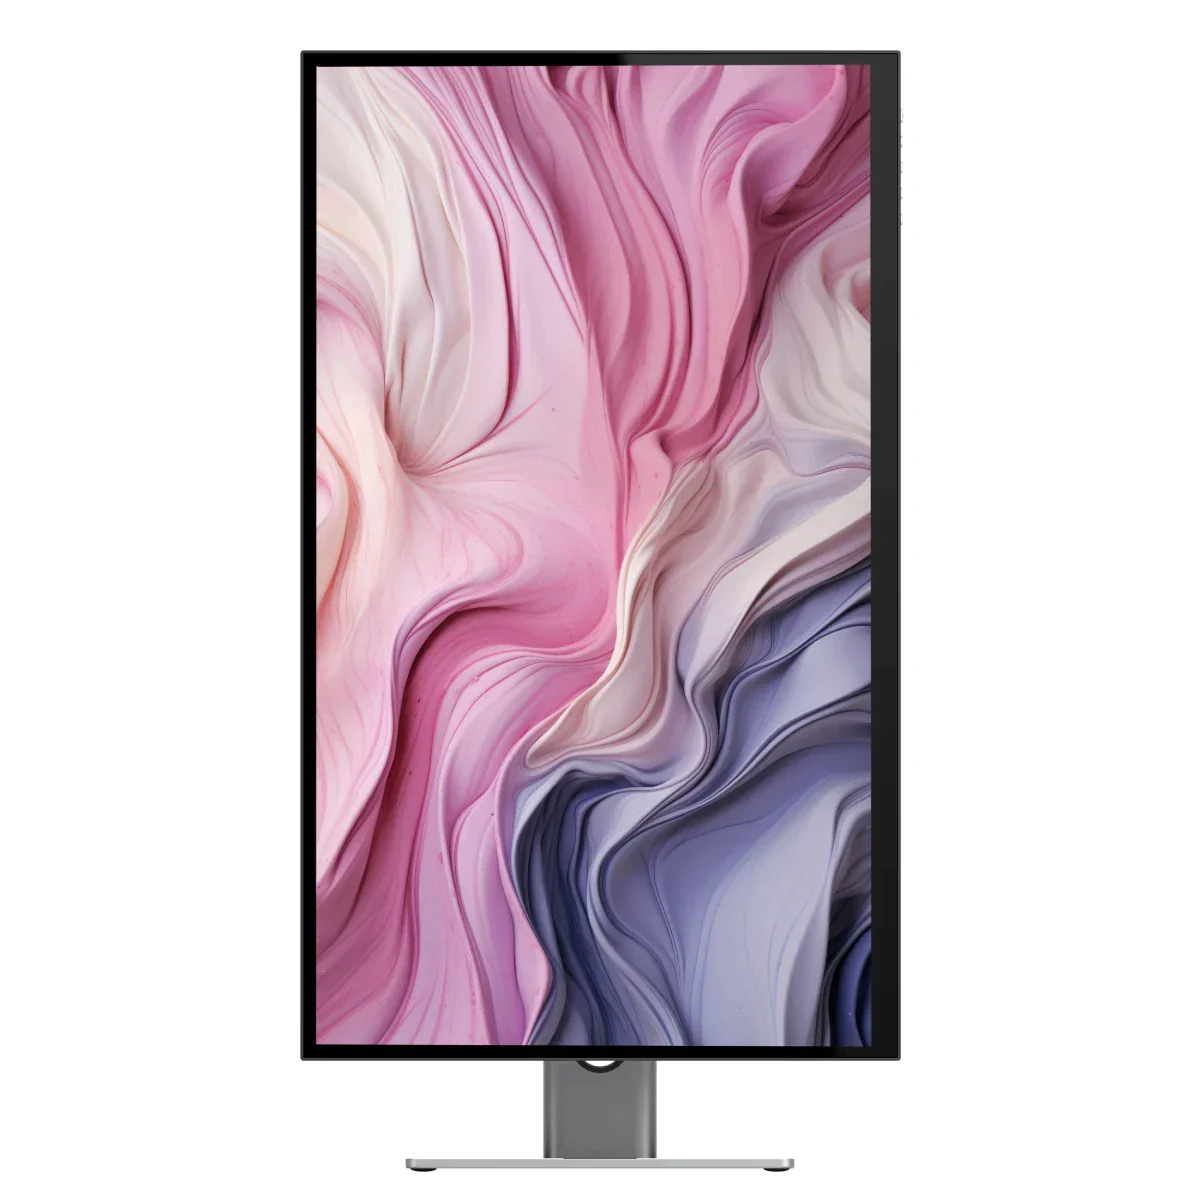 CLARITY 27" UHD 4K Monitor + Clarity Pro Touch 27" UHD 4K Monitor with 65W PD, Webcam and Touchscreen + Dual 4K Universal Docking Station "DisplayPort Edition